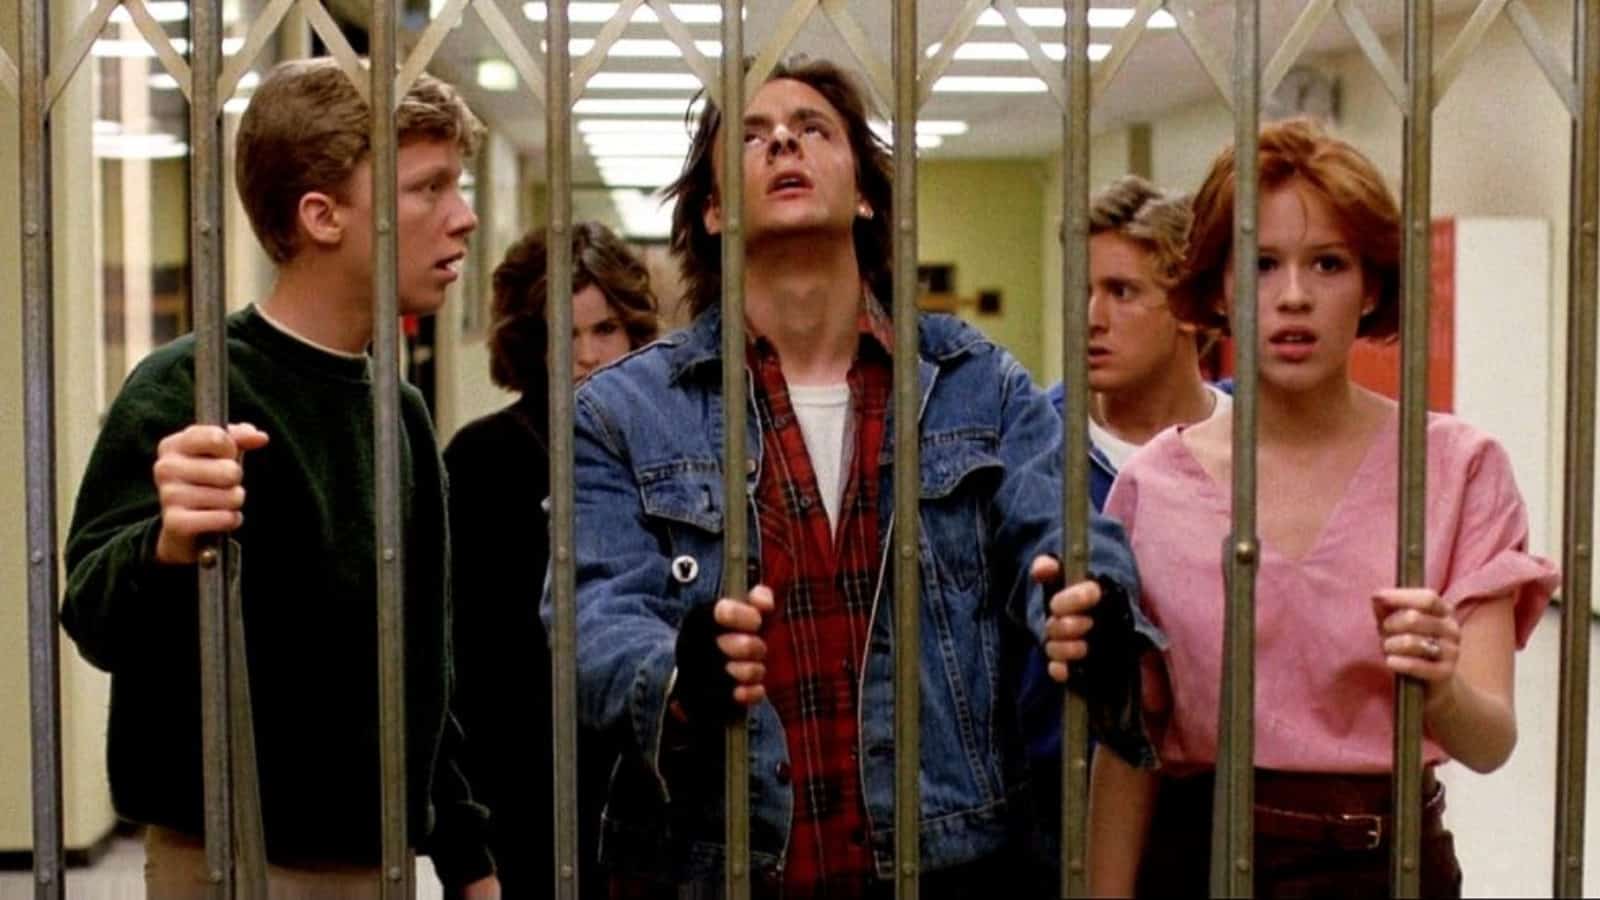 A scene from The Breakfast Club